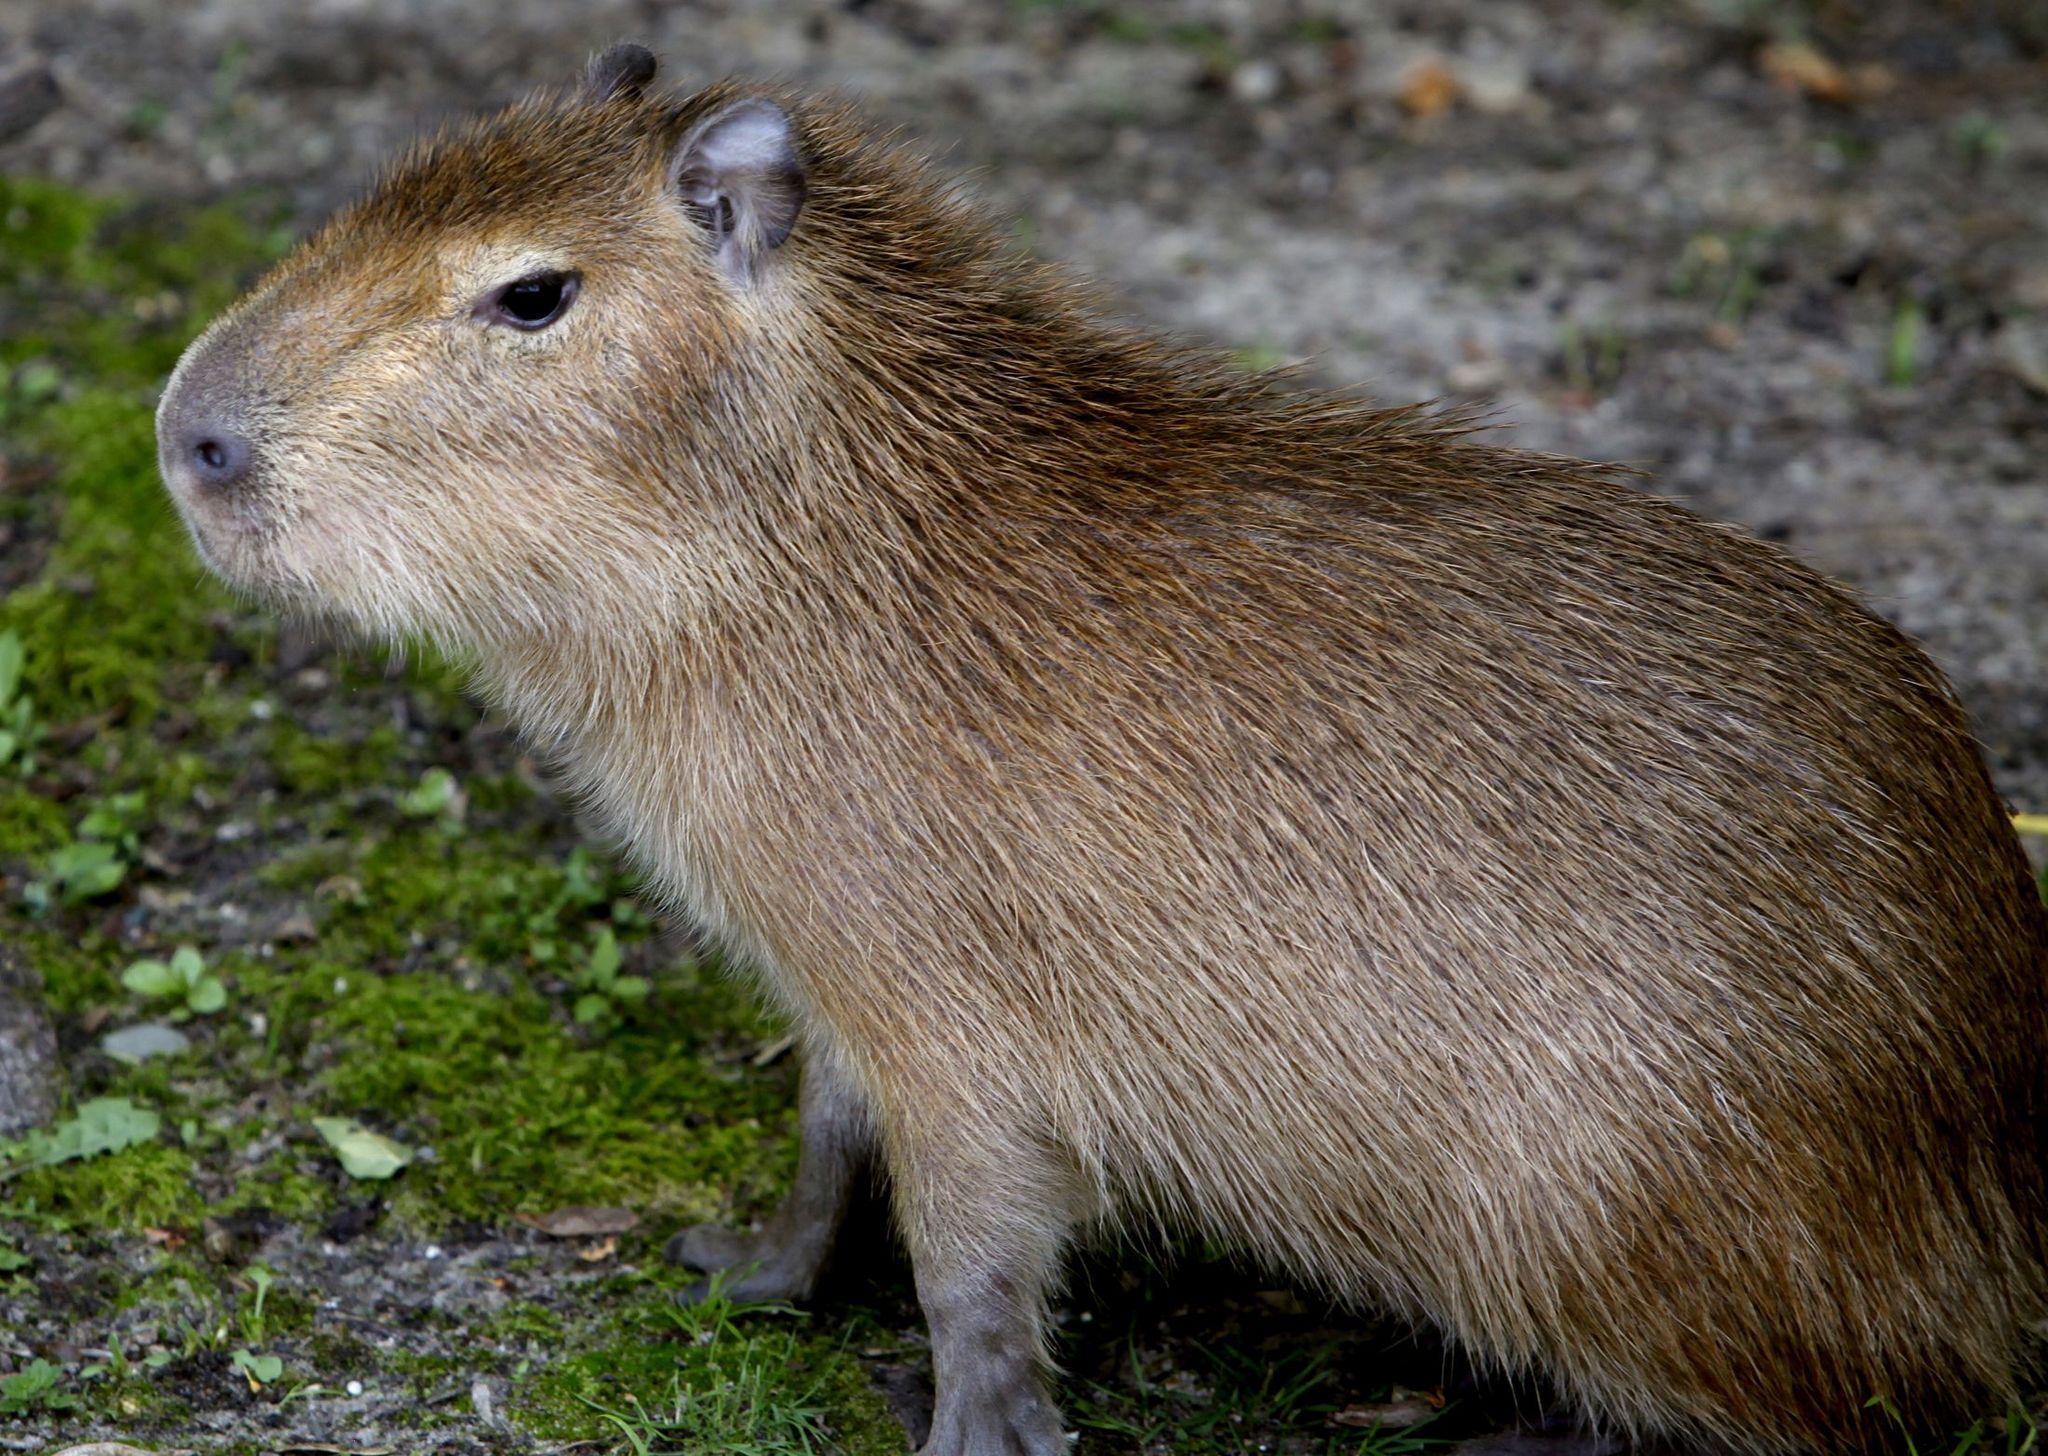 Exhibit featuring baby Capybaras, largest rodent species, opens at ...